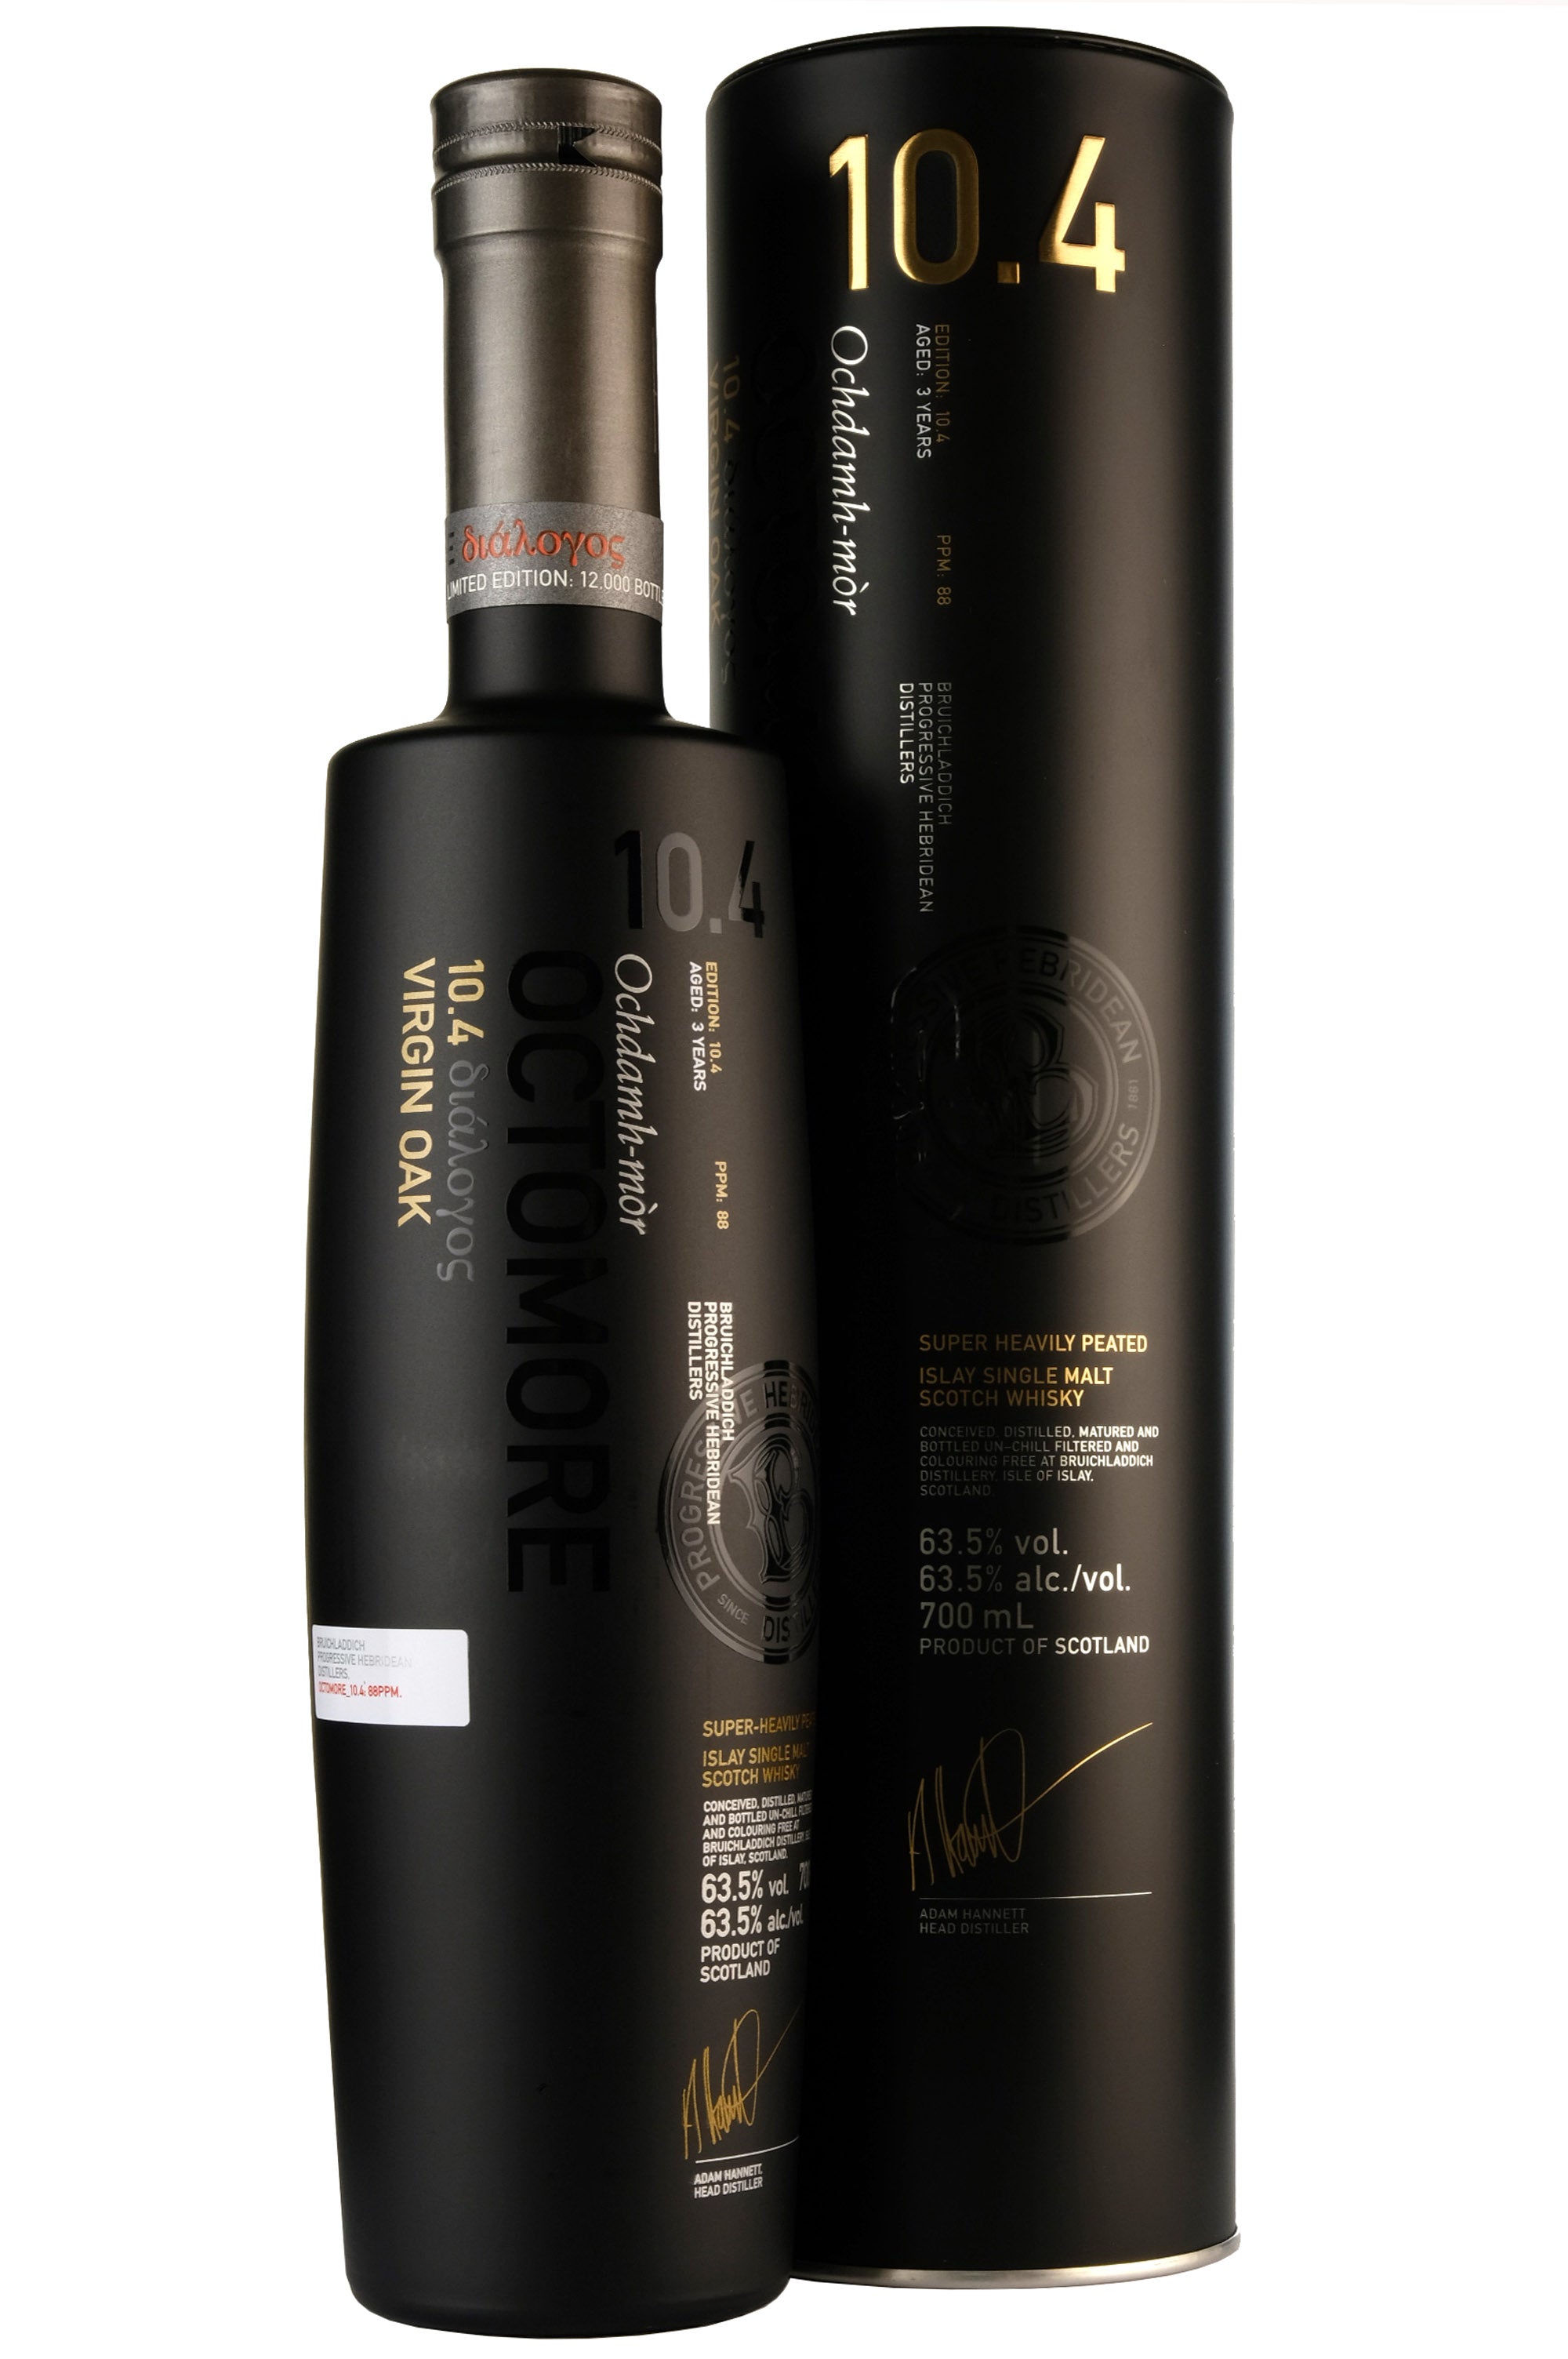 Octomore Edition 10.4 3 Year Old